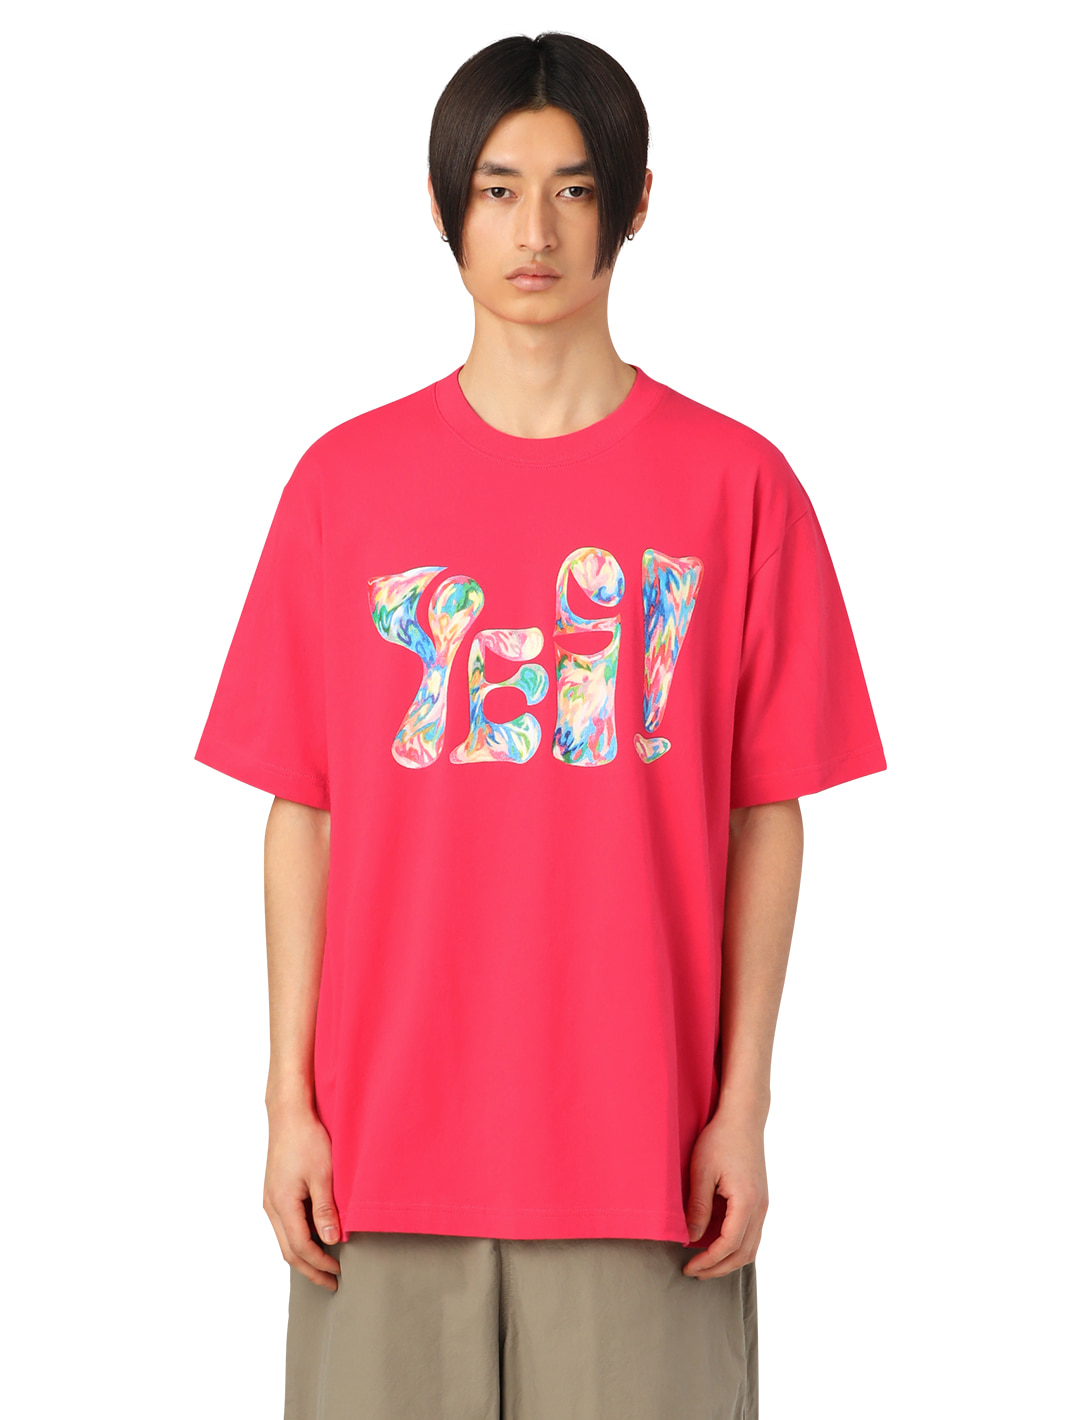 SKW YES Tee Pink